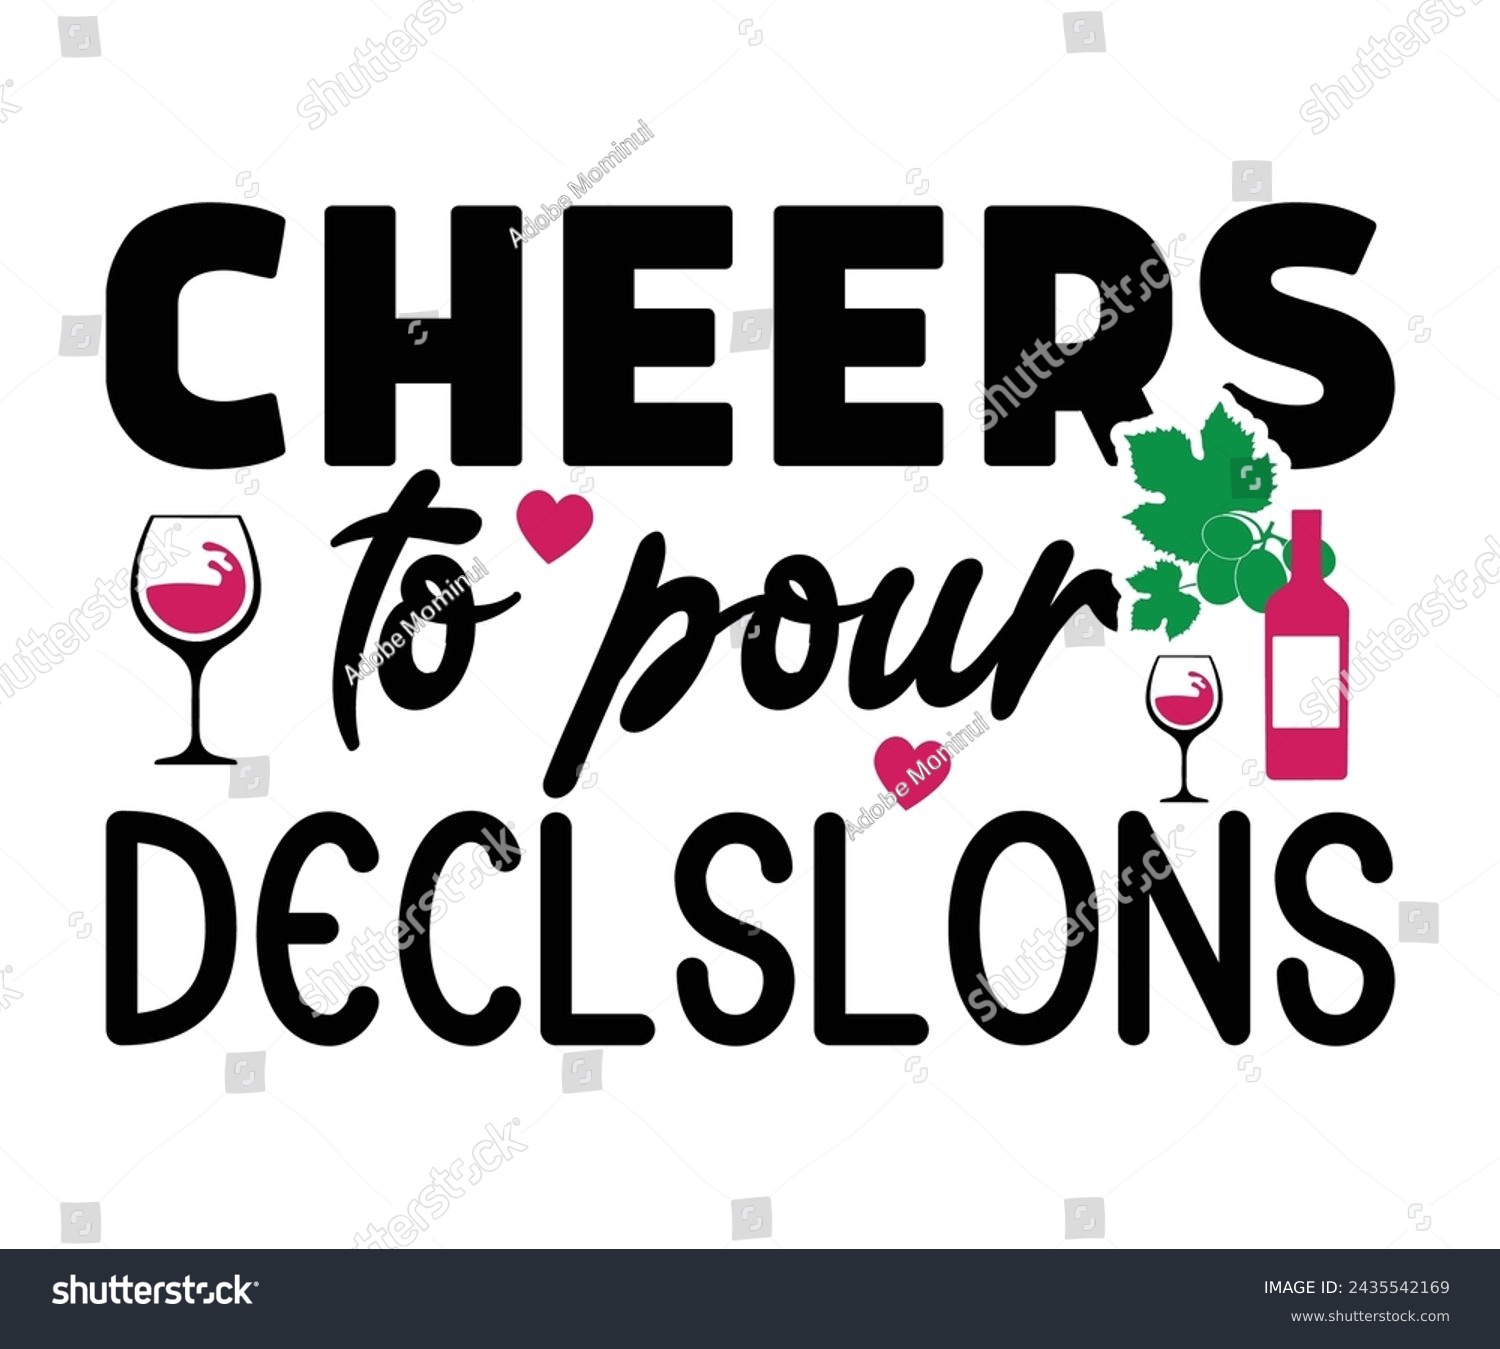 SVG of Cheers To Pour Declslons,T-shirt Design,Wine Svg,Drinking Svg,Wine Quotes Svg,Wine Lover,Wine Time Svg,Wine Glass Svg,Funny Wine Svg,Beer Svg,Cut File svg